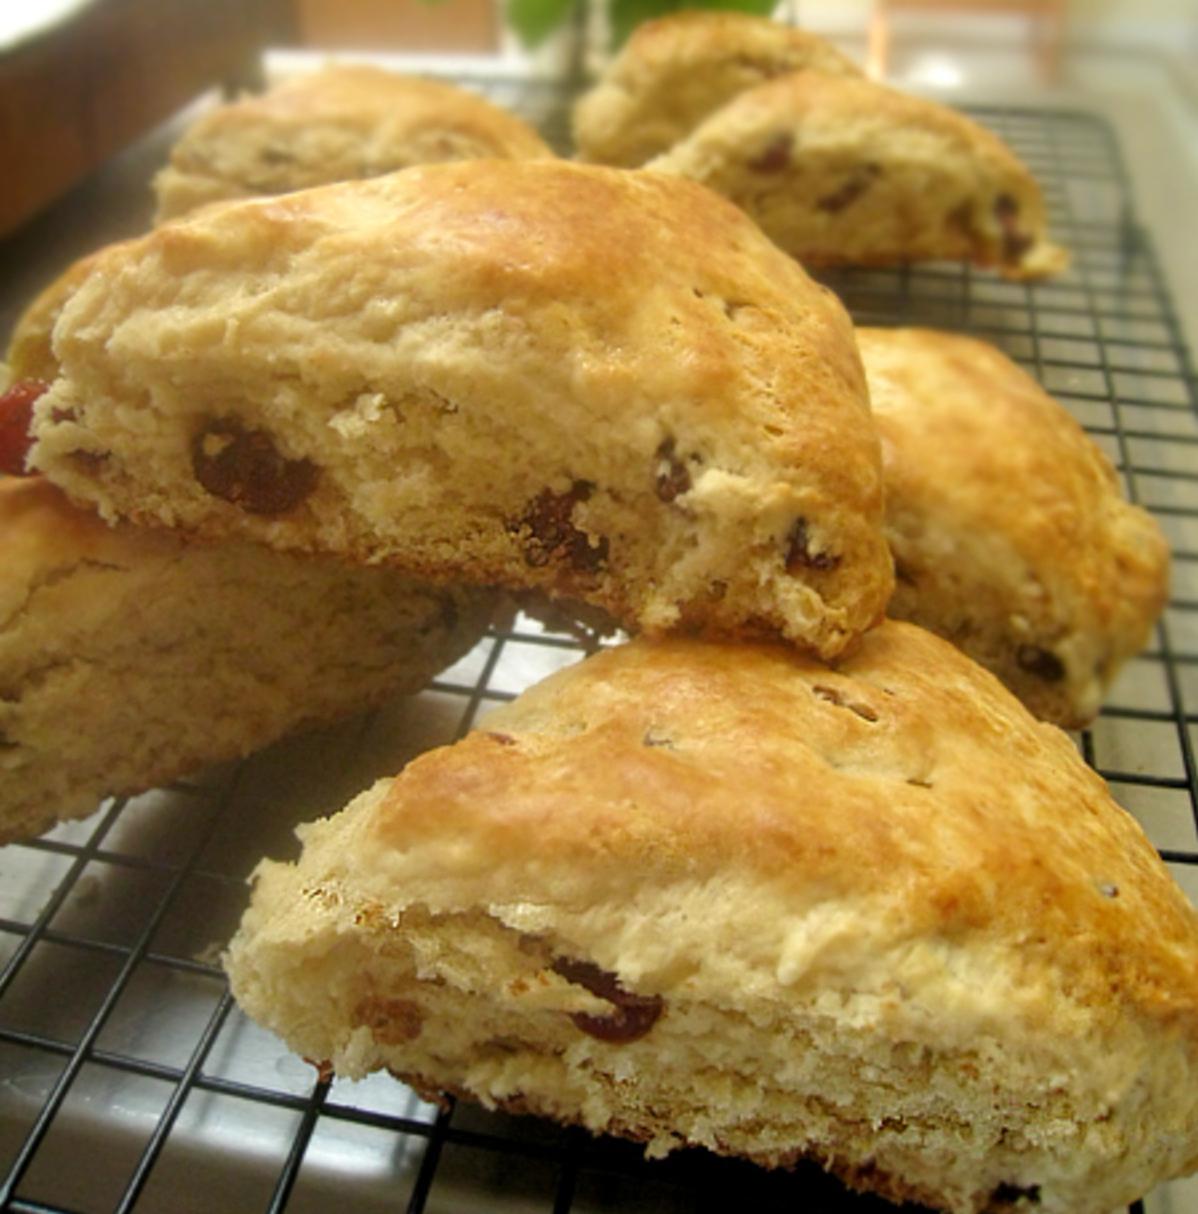  Brighten up your day with these delicious Irish Dried Cherry Buttermilk Scones!